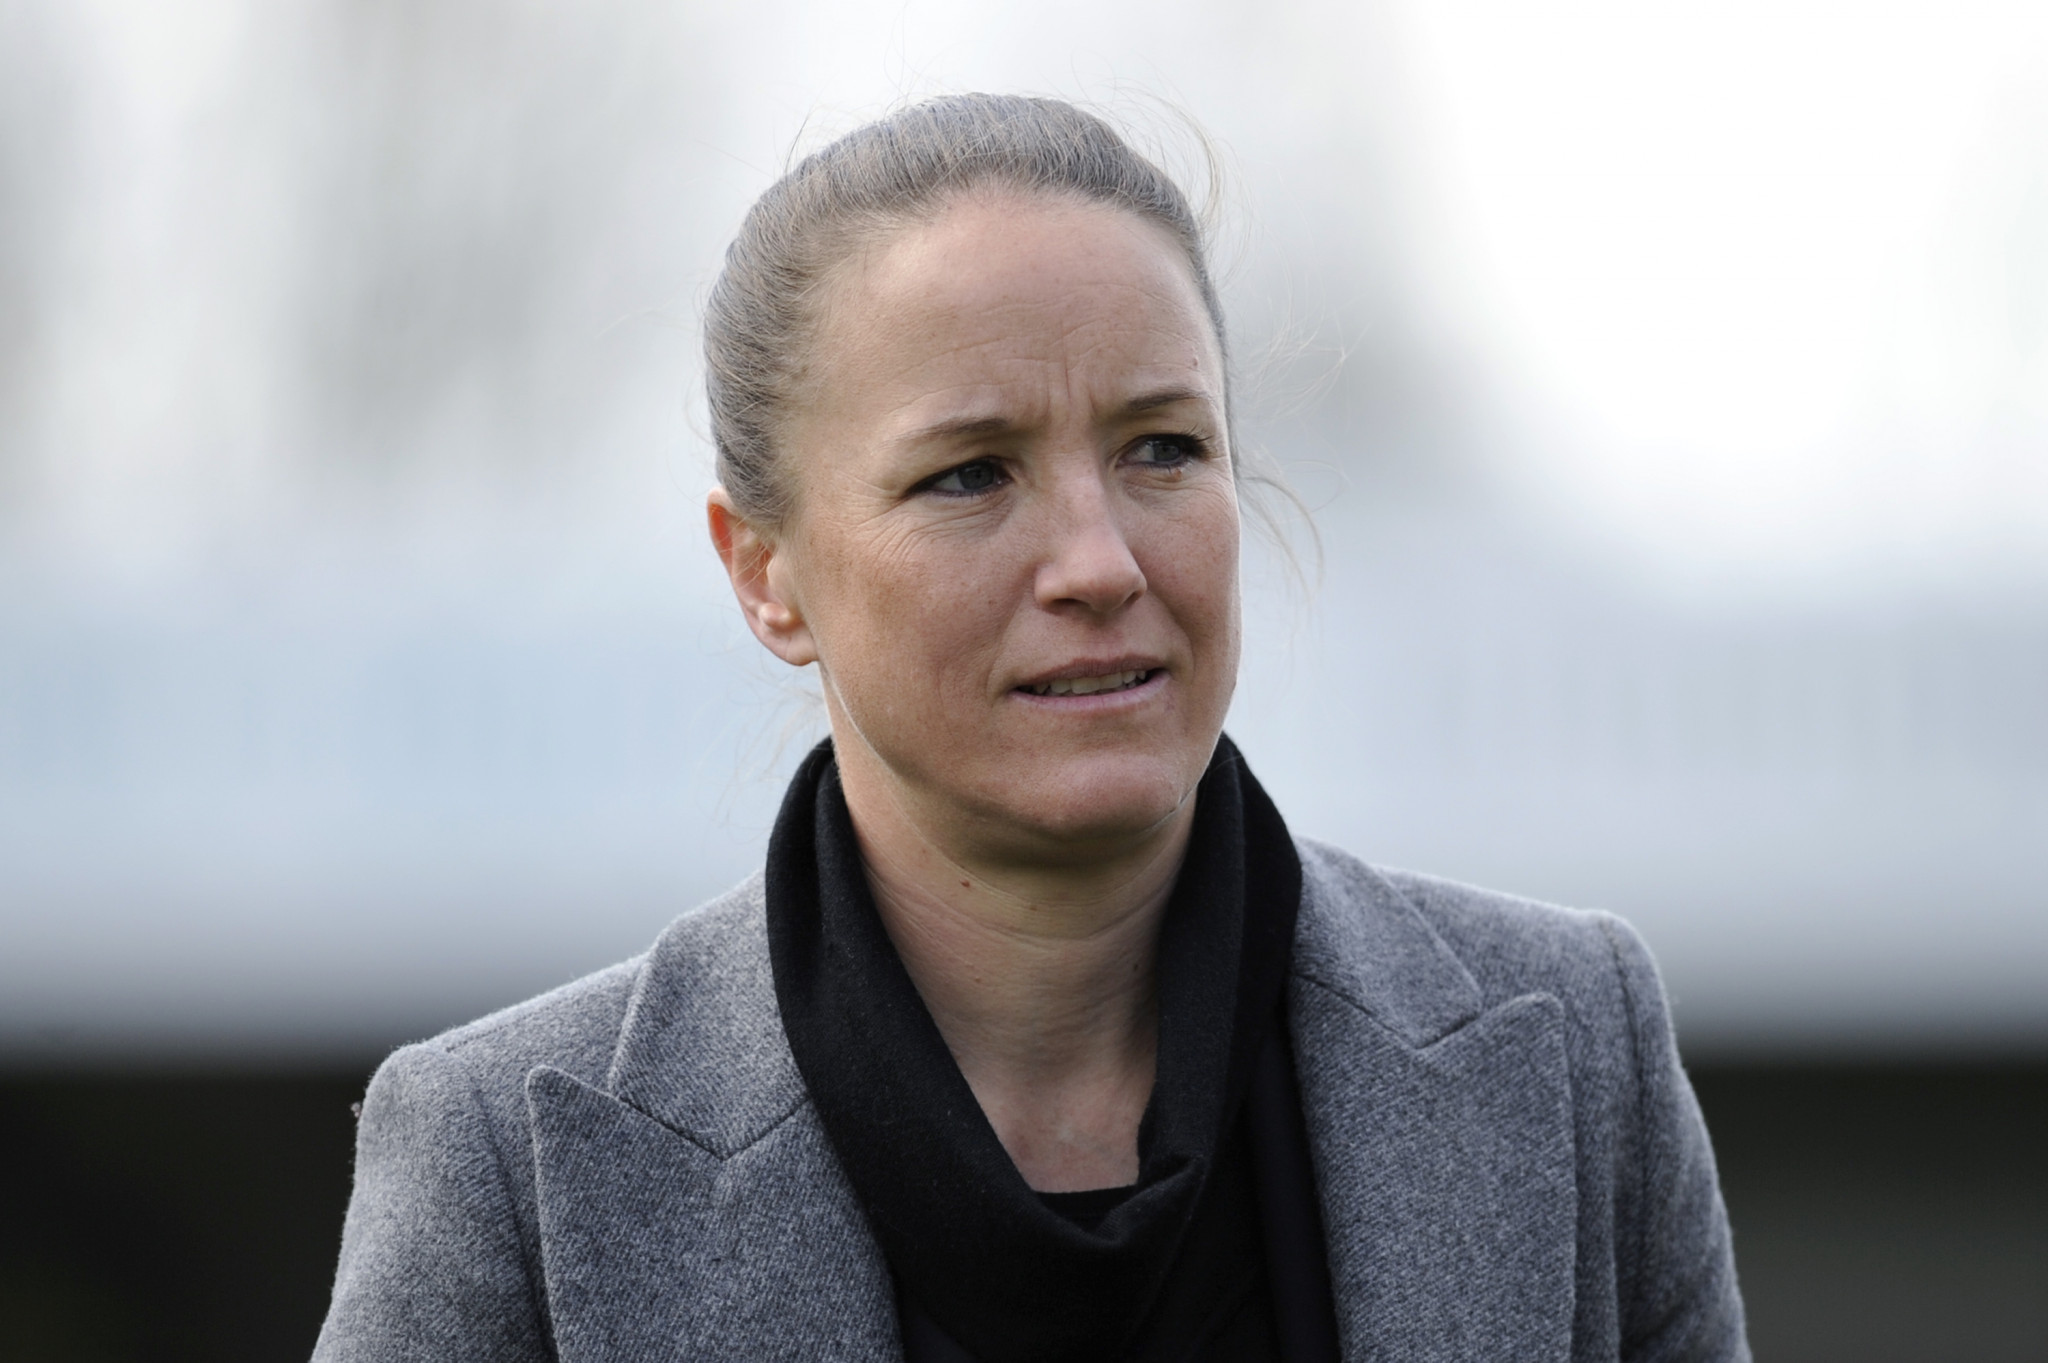 Former England captain Casey Stoney has blamed poor crowds at the 2019 FIFA Women's World Cup in France on the organisers failing to promote the tournament properly ©Getty Images